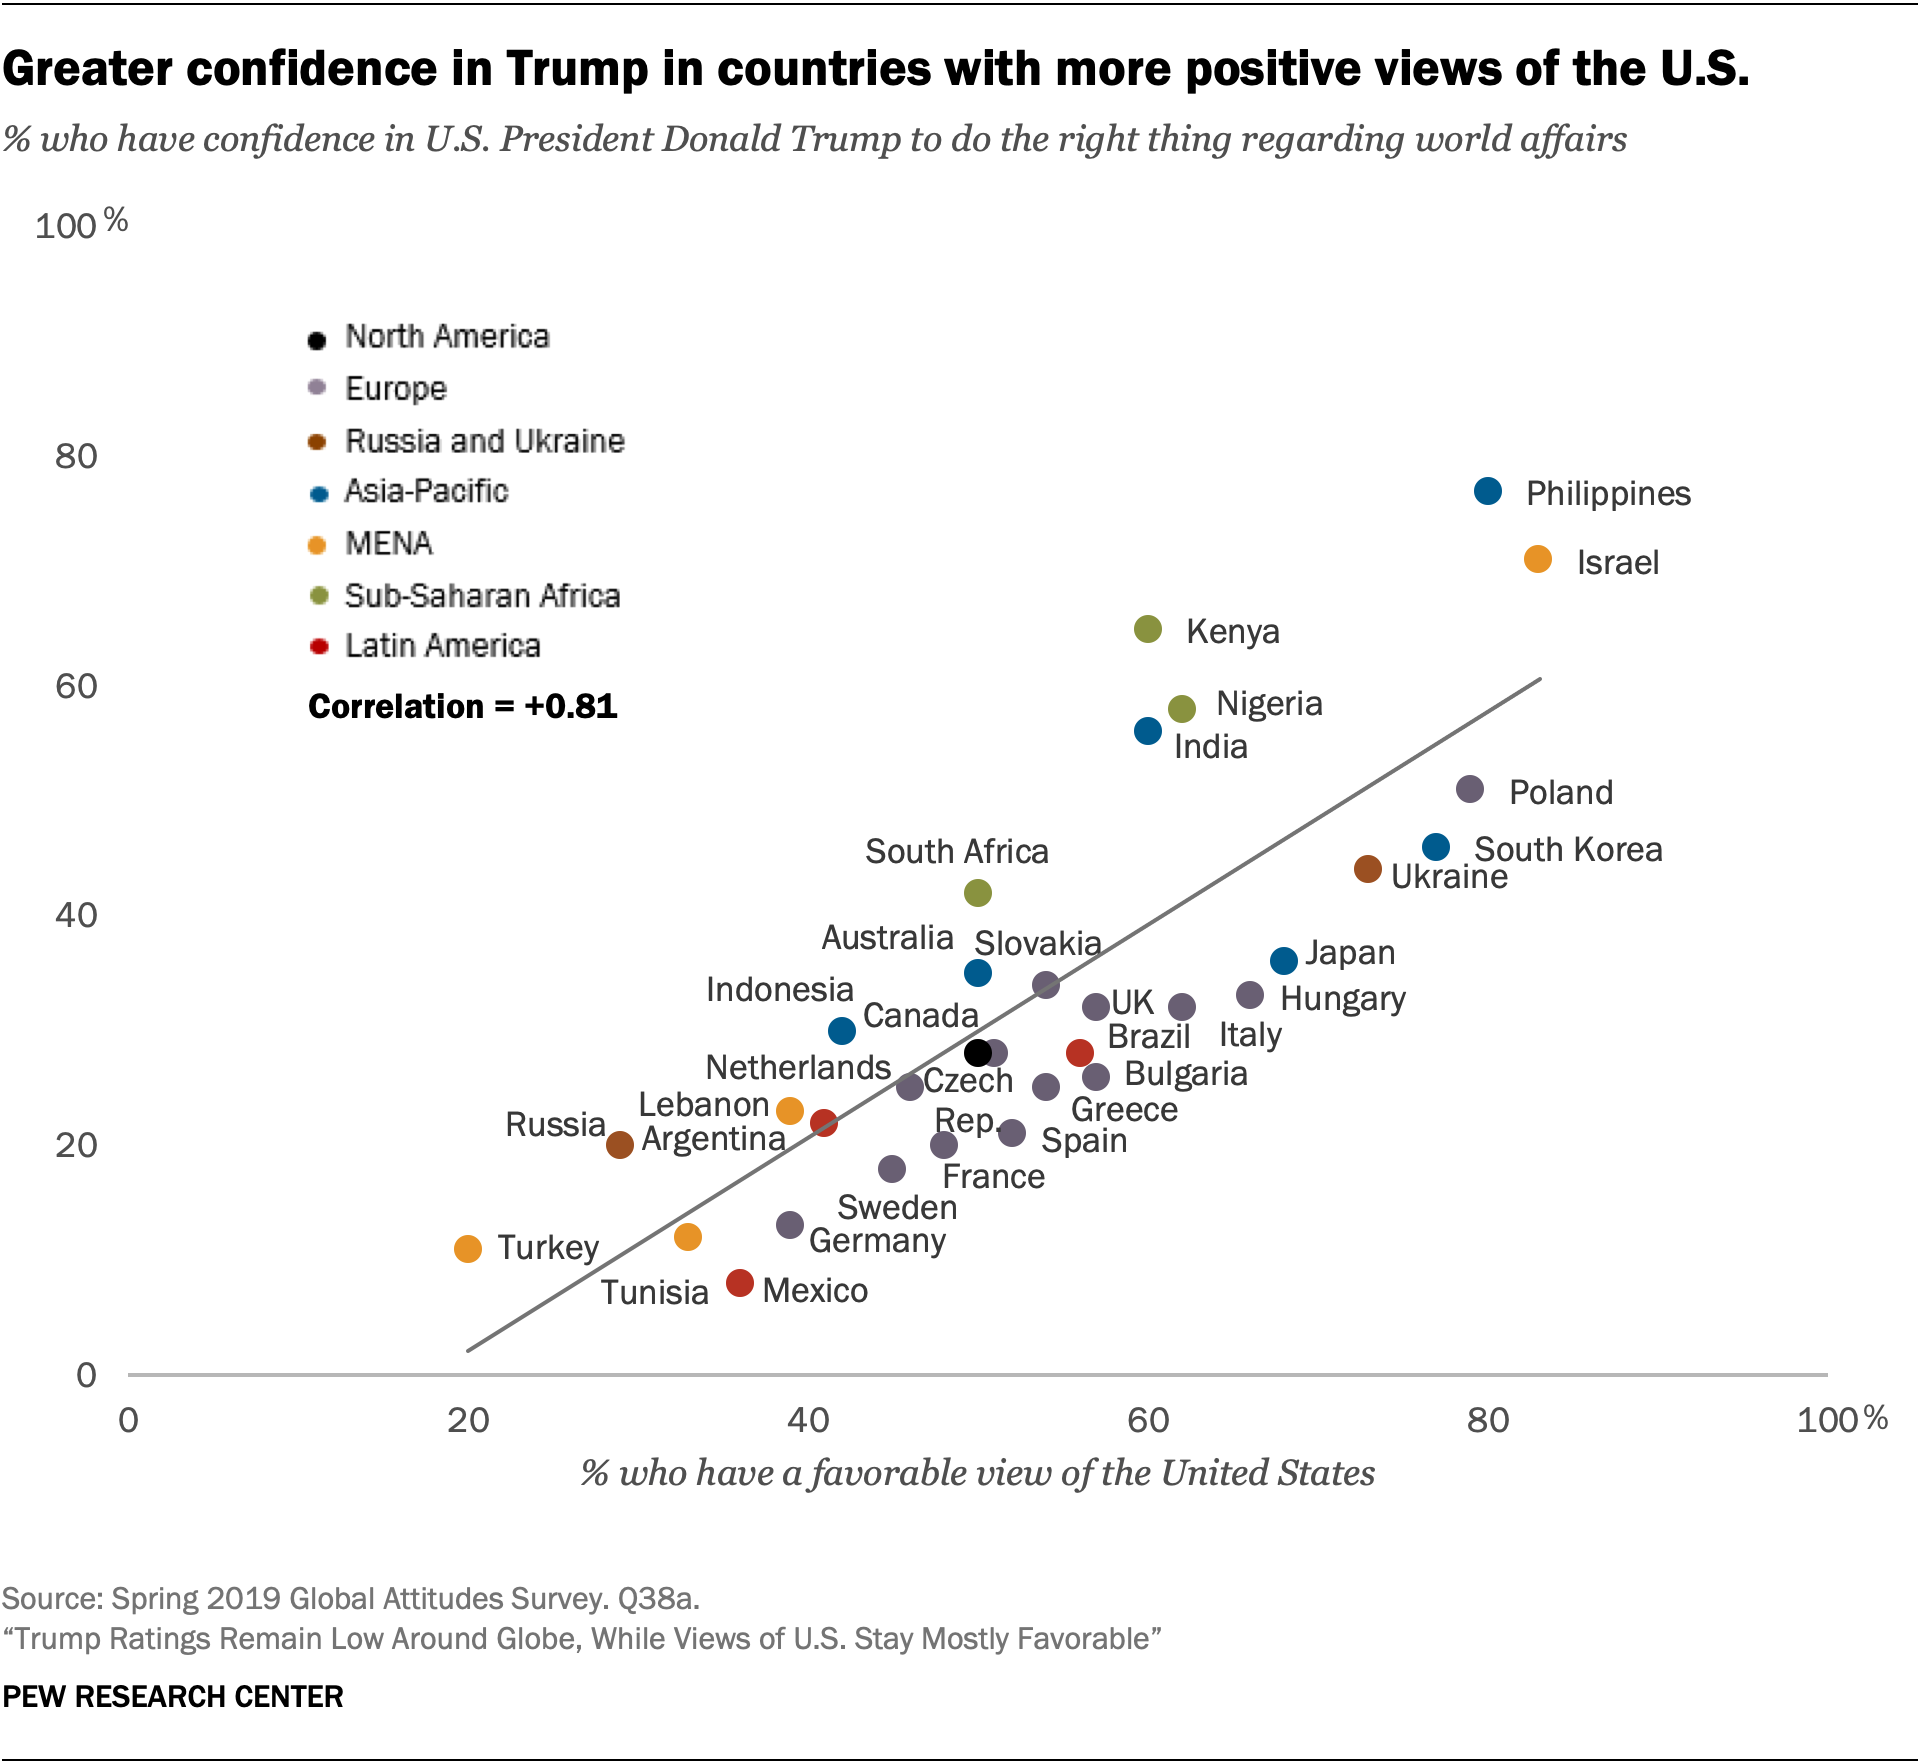 Greater confidence in Trump in countries with more positive views of the U.S.